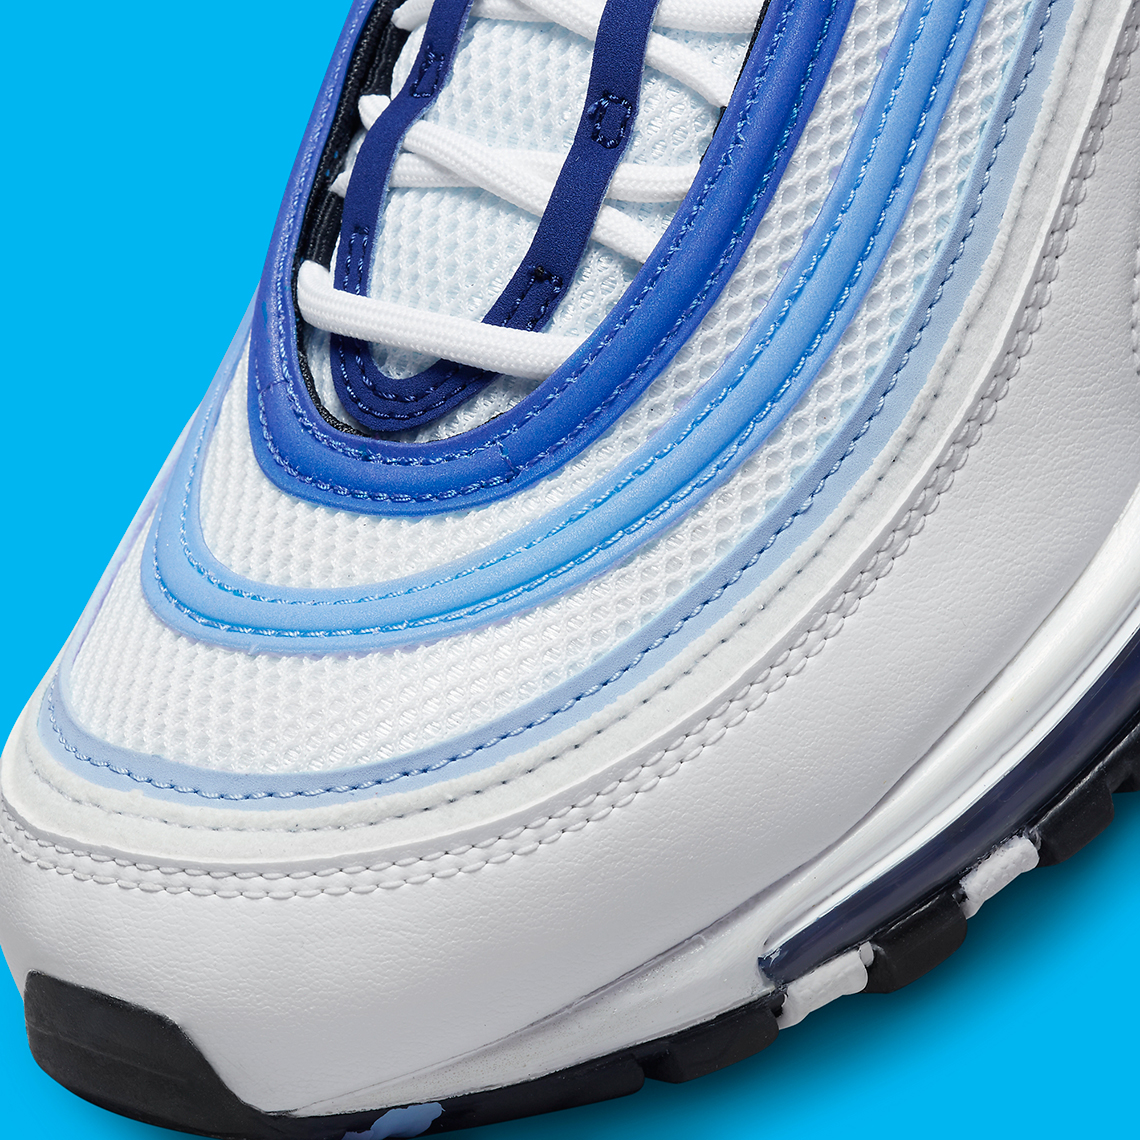 nike-air-max-97-blueberry-do8900-100-release-date-4.jpg